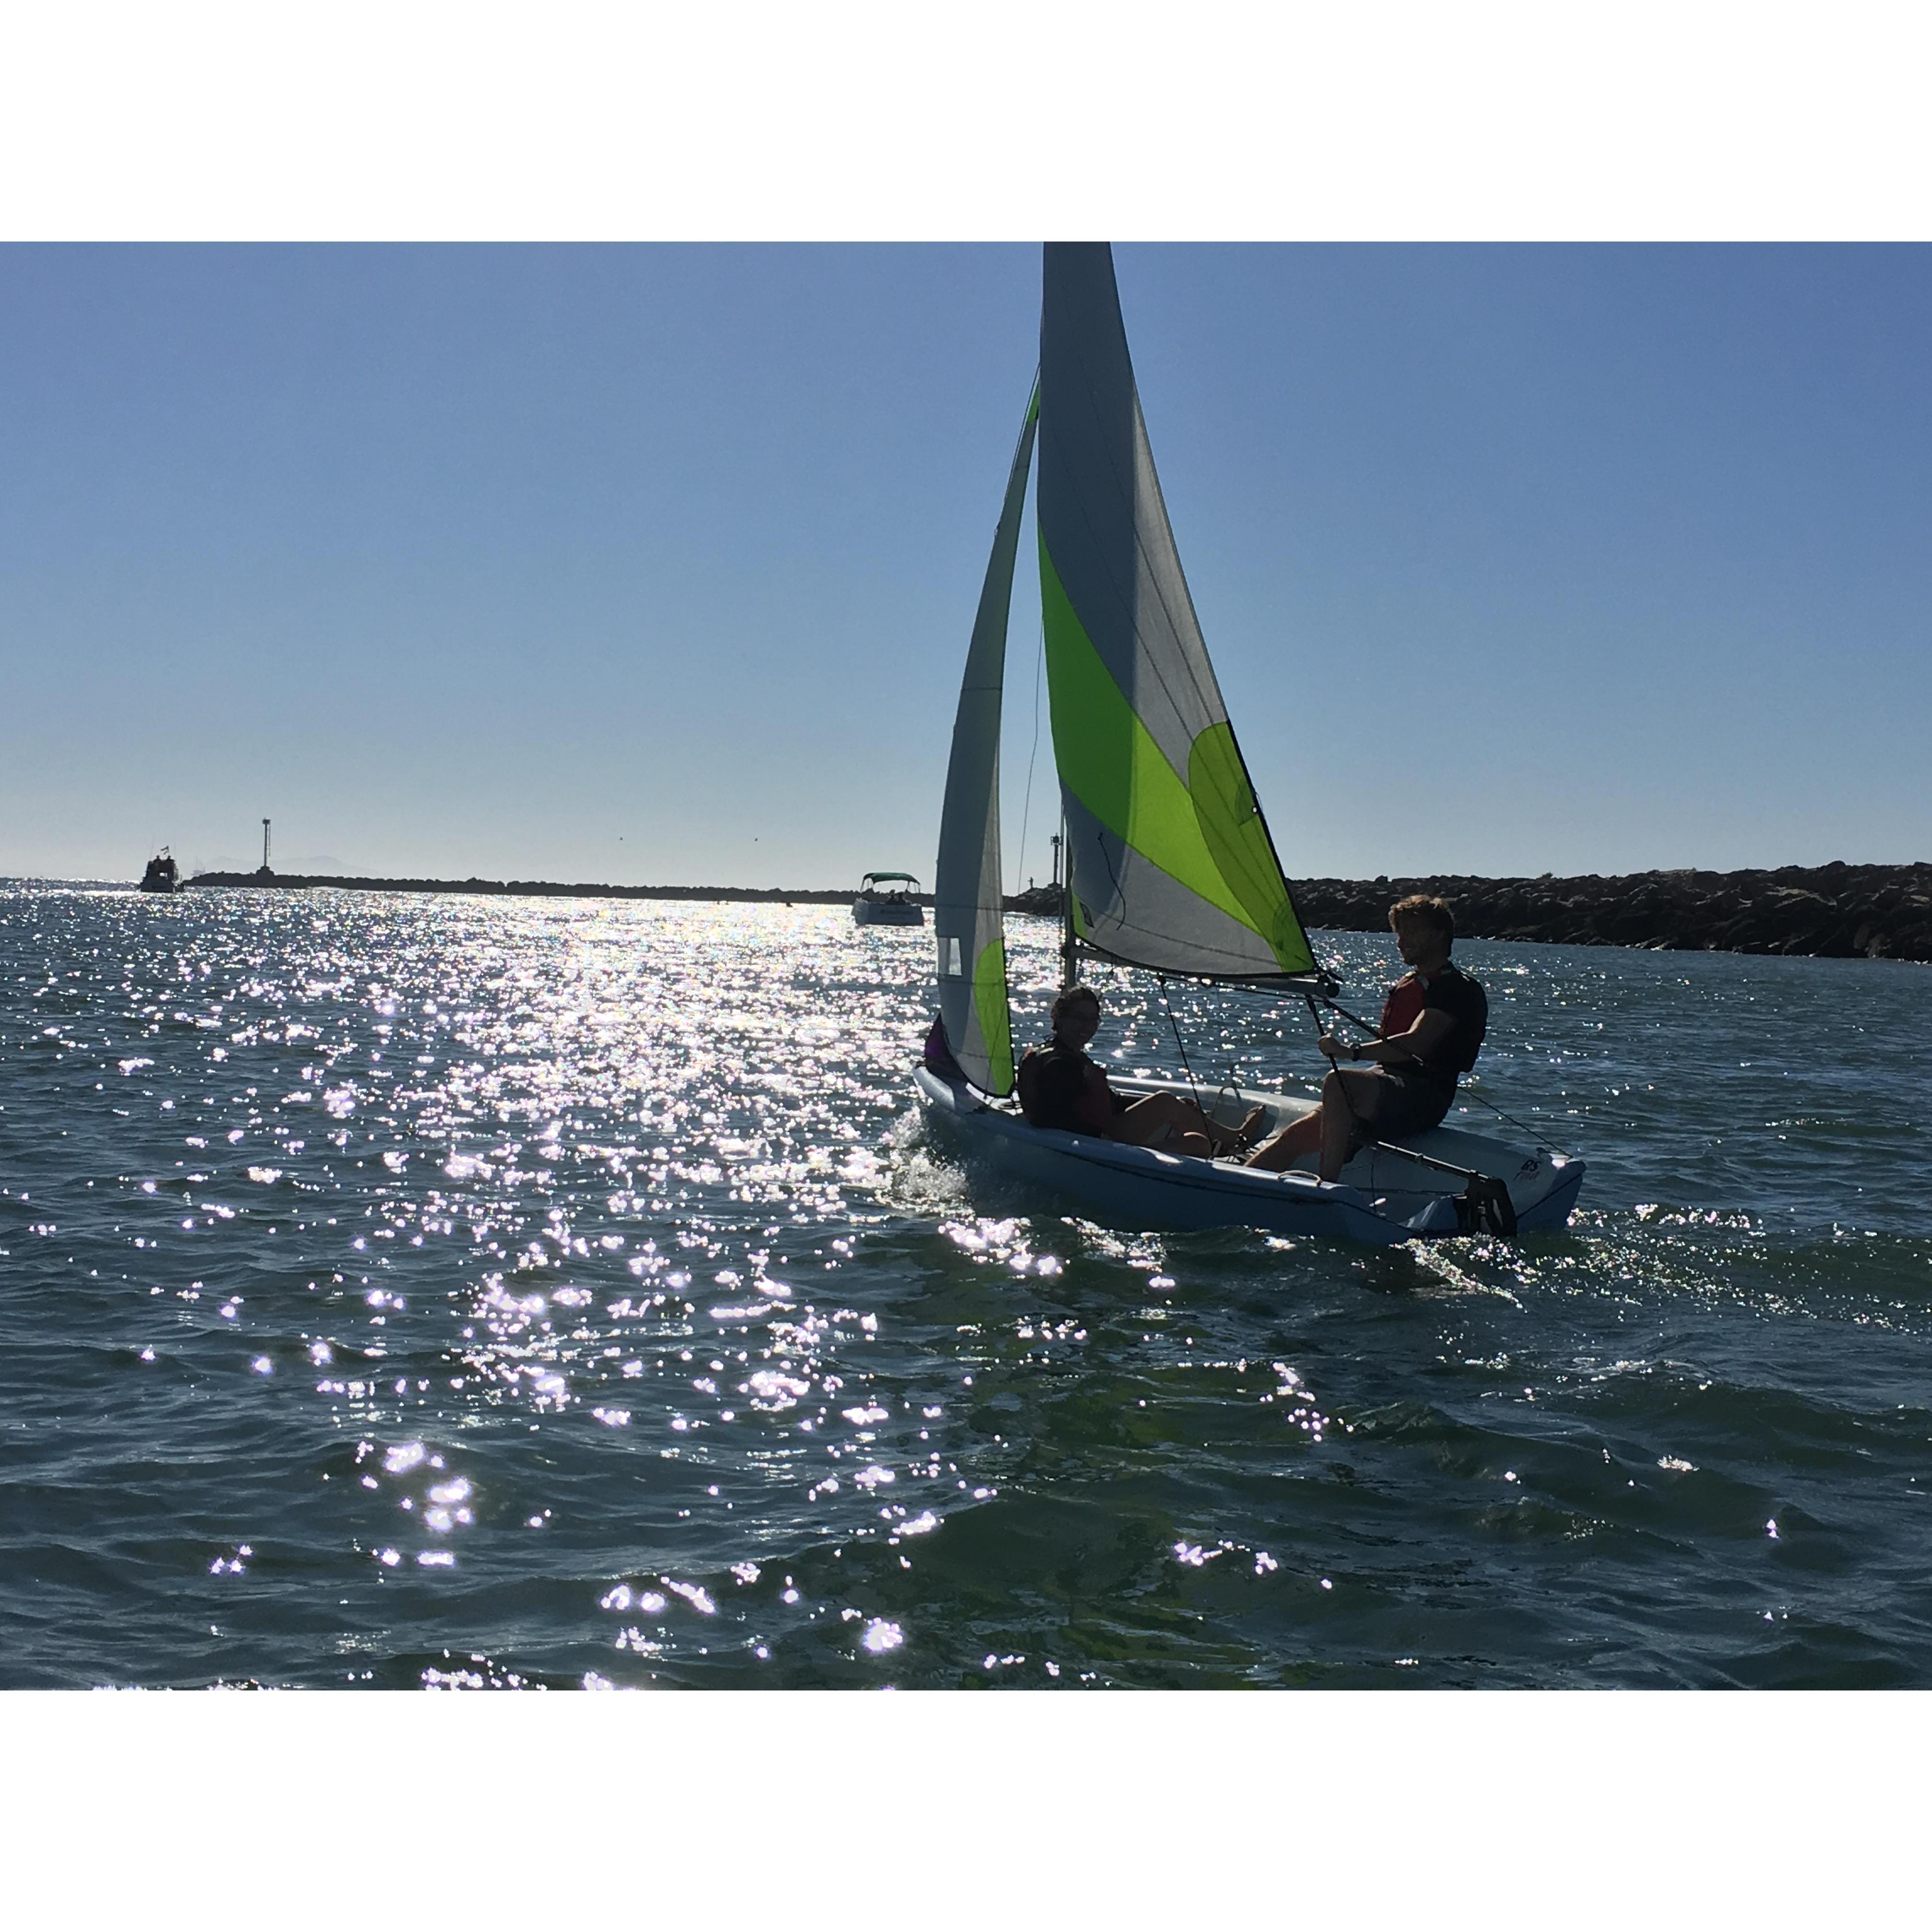 Sailing lessons at the CI Boating Center in Channel Islands Harbor.